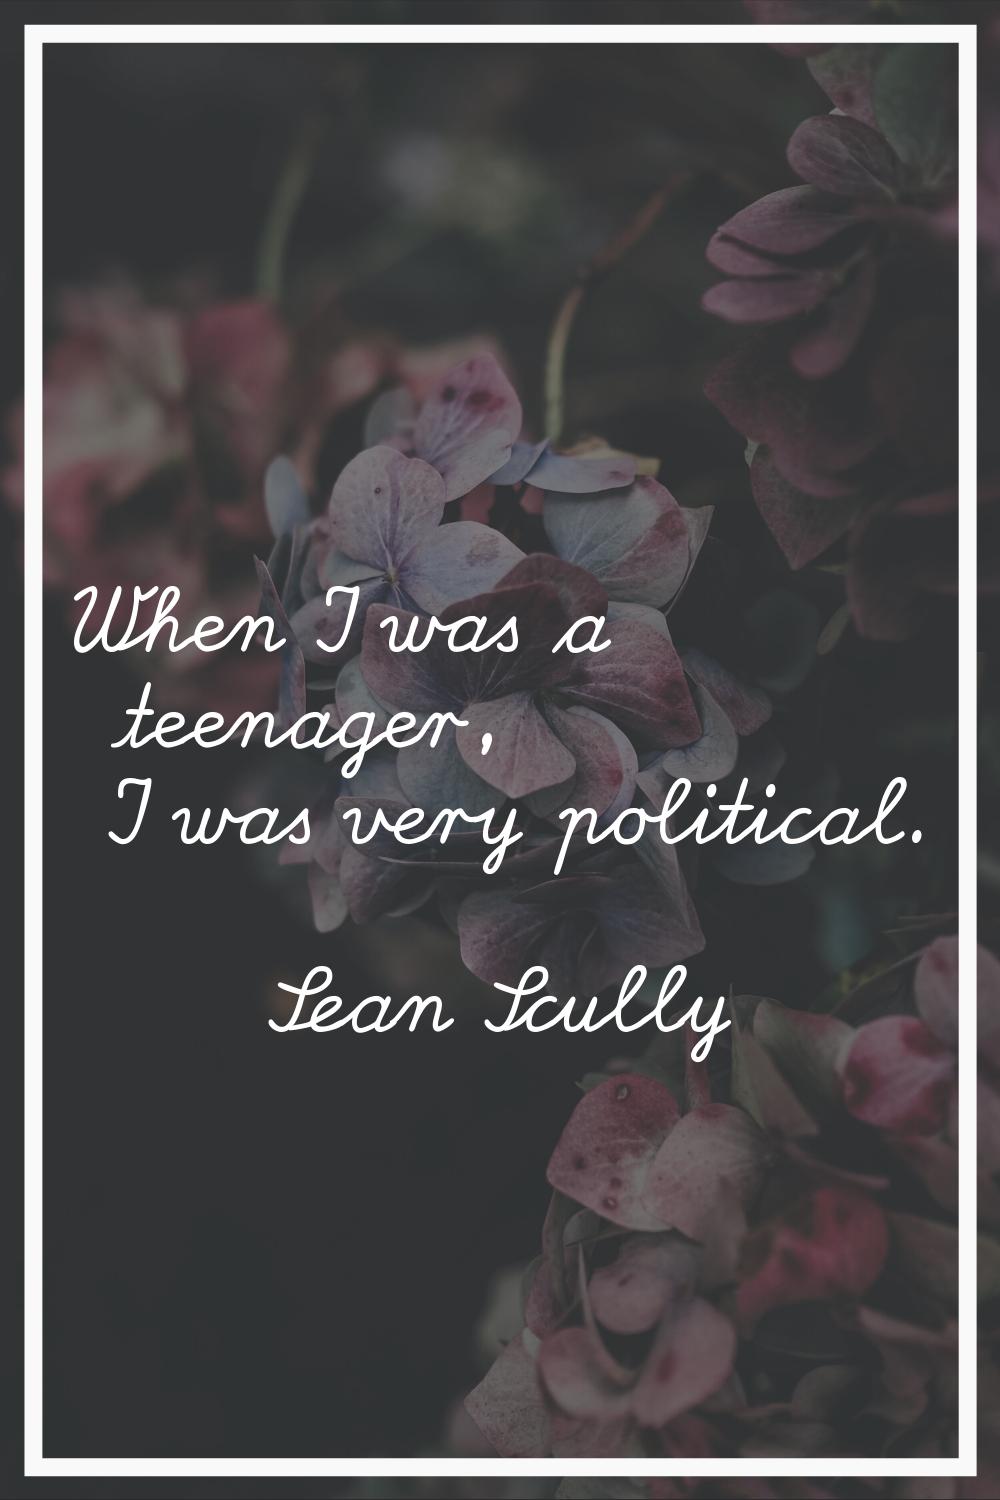 When I was a teenager, I was very political.